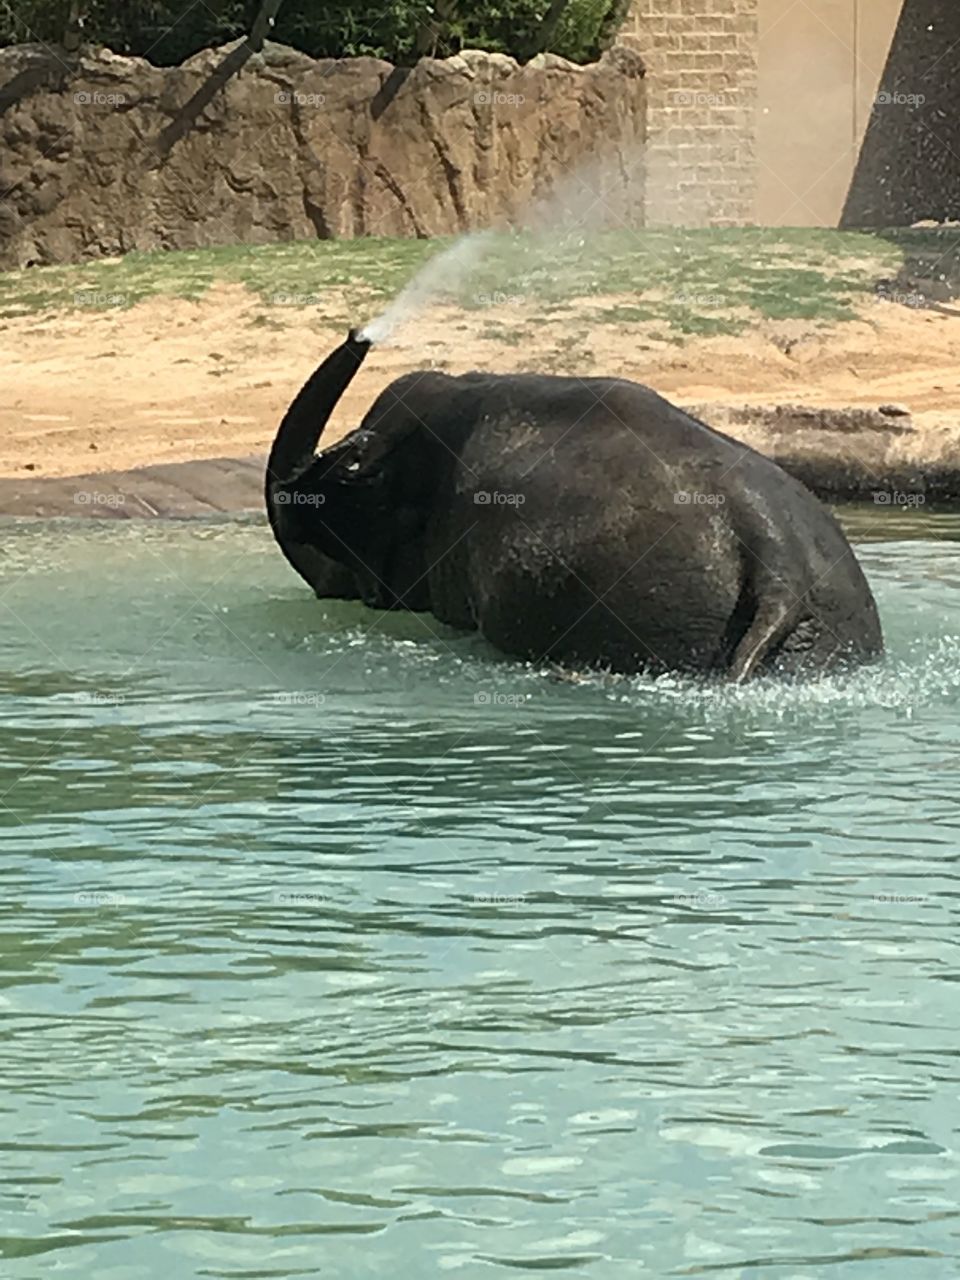 Silly elephant at the zoo